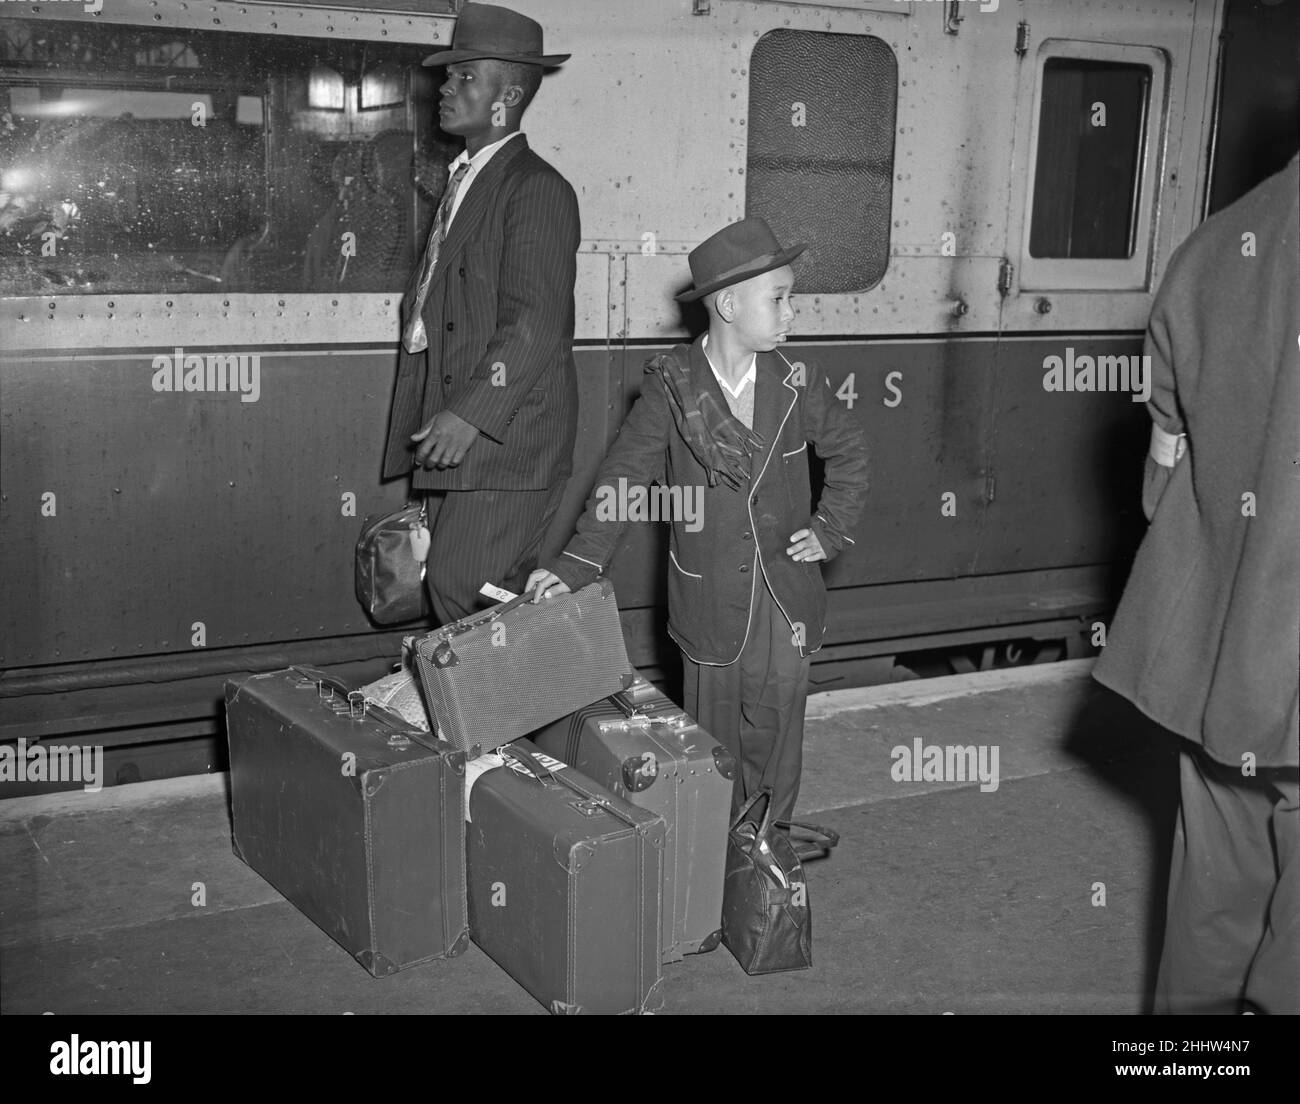 Jamaican emigrants arriving at Waterloo Station 22nd September 1954A train load of hopes  reached London when nearly 700 Jamaicans arrived In search of work. Most of the arrivals were men. Many said they had work to go to. or relatives to live with. Half of them plan to stay in London. The rest are bound for the Midlands and the North. Since the beginning of the year (1954) more than 6,000 Jamaicans have arrived in Britain. Stock Photo